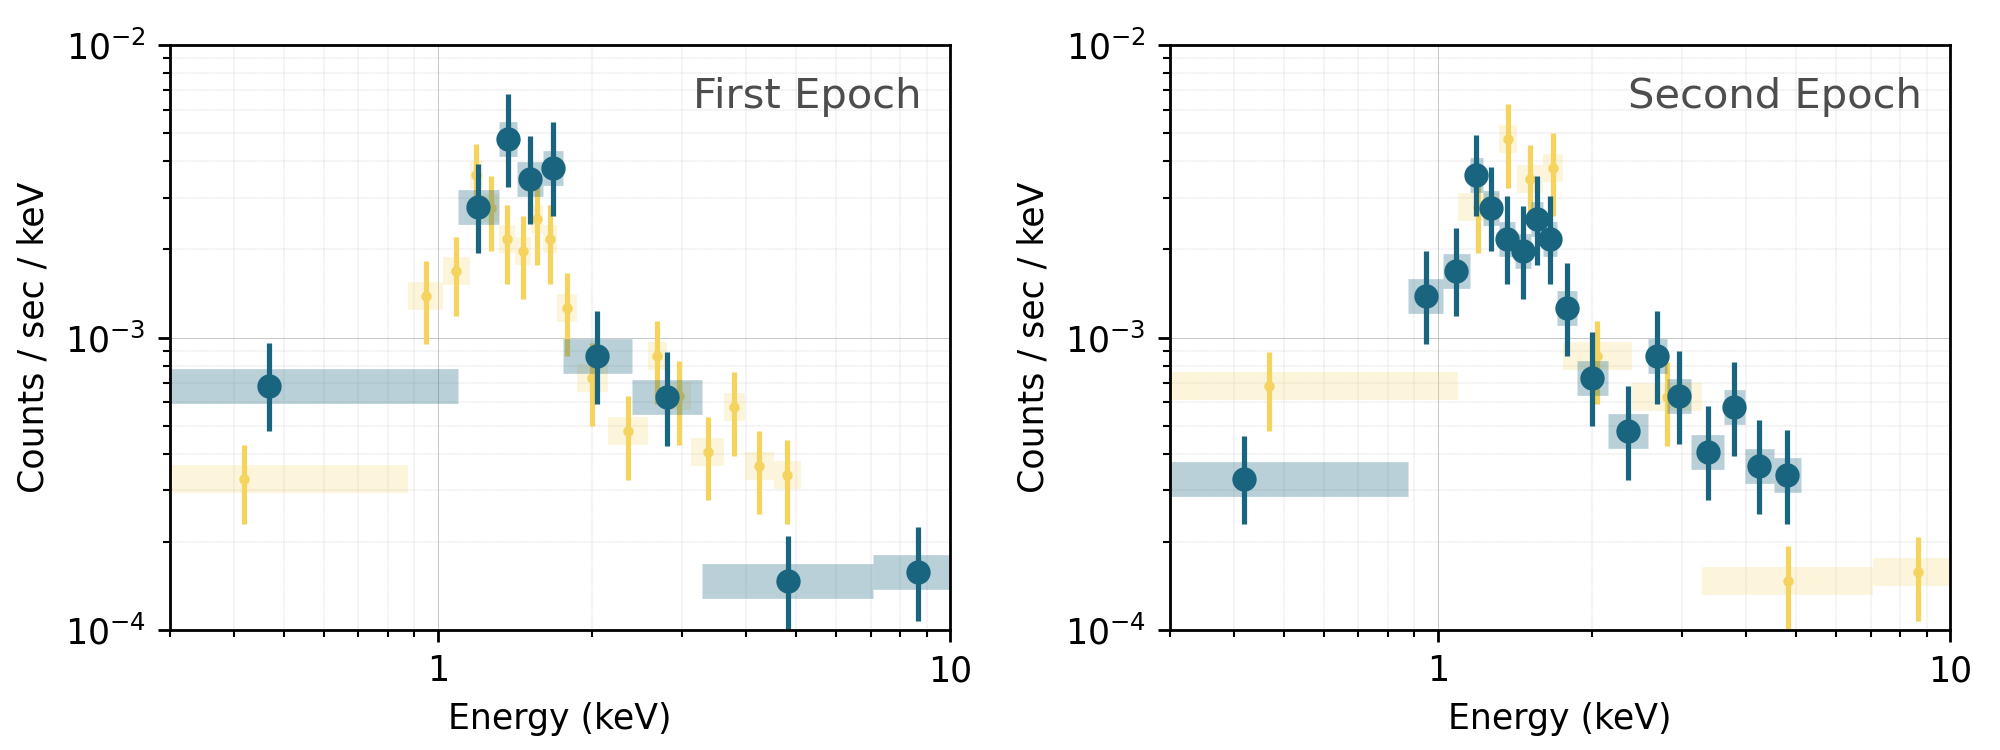 Fig 2, Left: A plot labeled “First Epoch,” with an X-Axis labeled “Energy (keV)” stretching logarithmically from 0.3 to 10 and a Y-Axis labeled “Counts / sec / keV” stretching logarithmically from 10-4 to 10-2. Nine blue points are shown, with error bars of around 30% and with faint horizontal bars behind them, combining to cover the entire X-span of the image. A similar set of yellow points, 18 in total, is shown behind the blue data. Both sets of points rise around 1 to 2 keV before dropping off. The yellow points, however, persist much higher for longer, being about three times as high as the blue points at energies of 4-5 keV.  Fig 2, Right: A plot labeled “Second Epoch,” with an X-Axis labeled “Energy (keV)” stretching logarithmically from 0.3 to 10 and a Y-Axis labeled “Counts / sec / keV” stretching logarithmically from 10-4 to 10-2. 18 blue points are shown, with error bars of around 30% and with faint horizontal bars behind them, combining to cover the entire X-span of the image. A similar set of yellow points, nine in total, is shown behind the blue data. Both sets of points rise around 1 to 2 keV before dropping off. The blue points, however, persist much higher for longer, being about three times as high as the yellow points at energies of 4-5 keV.
